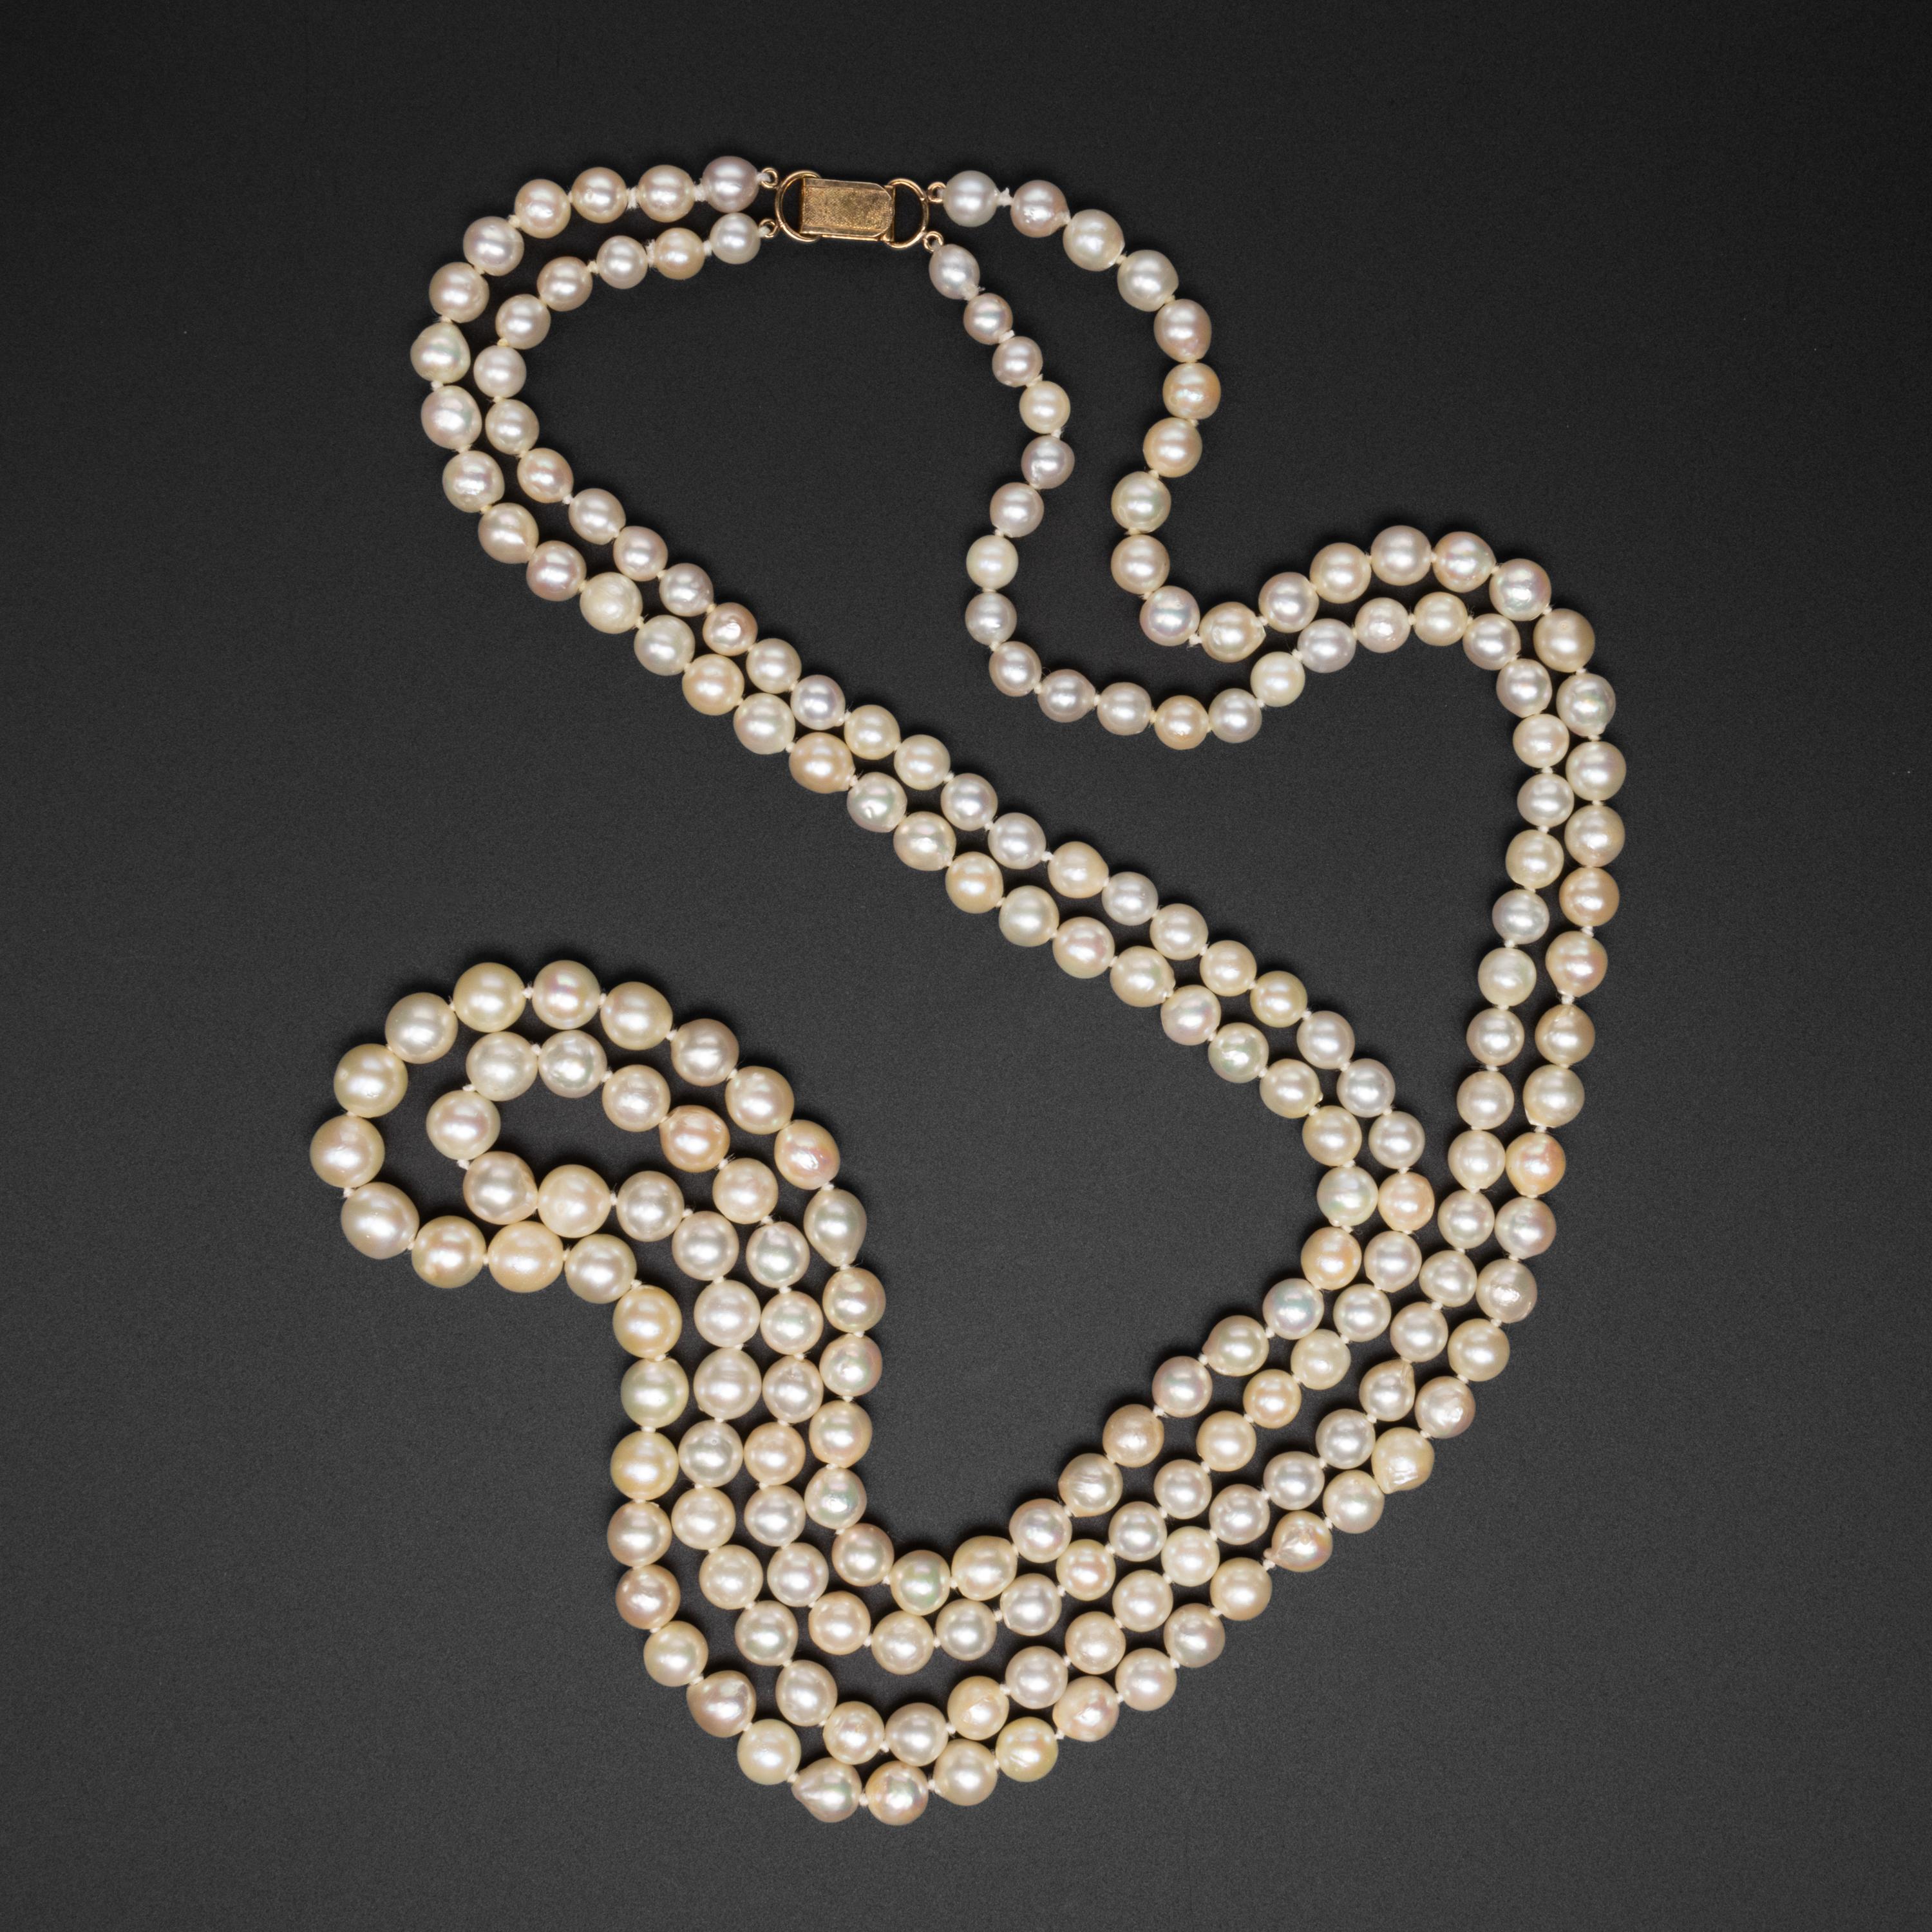 This luxurious strand of sumptuous cultured Akoya pearls from the Midcentury (circa 1960s) is composed of 206 pearls on silk, hand-knotted between each pearl. The original silk string remains in fine condition.  The pearls graduate in size from